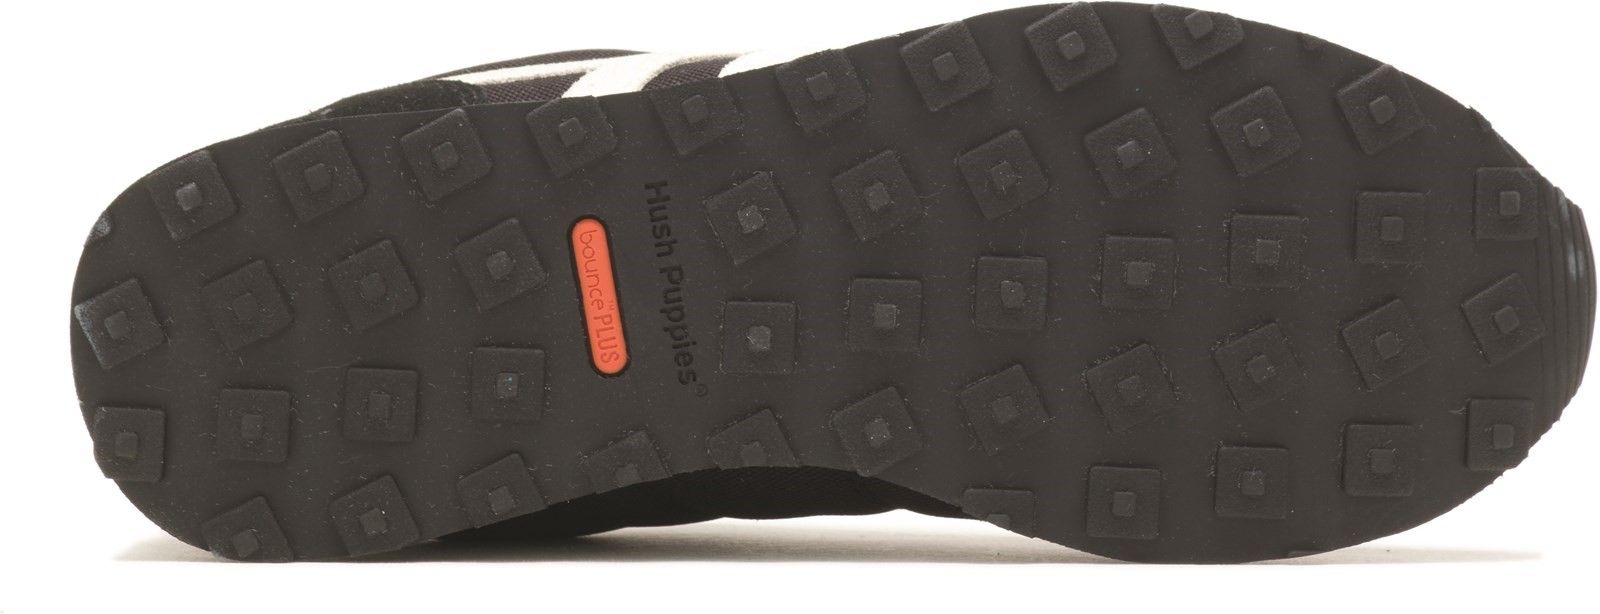 BOUNCE insole made of high rebound polyurethane compound foam provides extreme cushioning and returns energy in every step. This energizing cushion distributes weight evenly supporting the foot in total comfort.RPET (recycled) lining. 
Anti-fraying RPET (recycled) socklining. 
Removable BOUNCE footbed. 
Slip lasted Strobel construction for flexibility and comfort. 
Cut and buff EVA classic midsole.